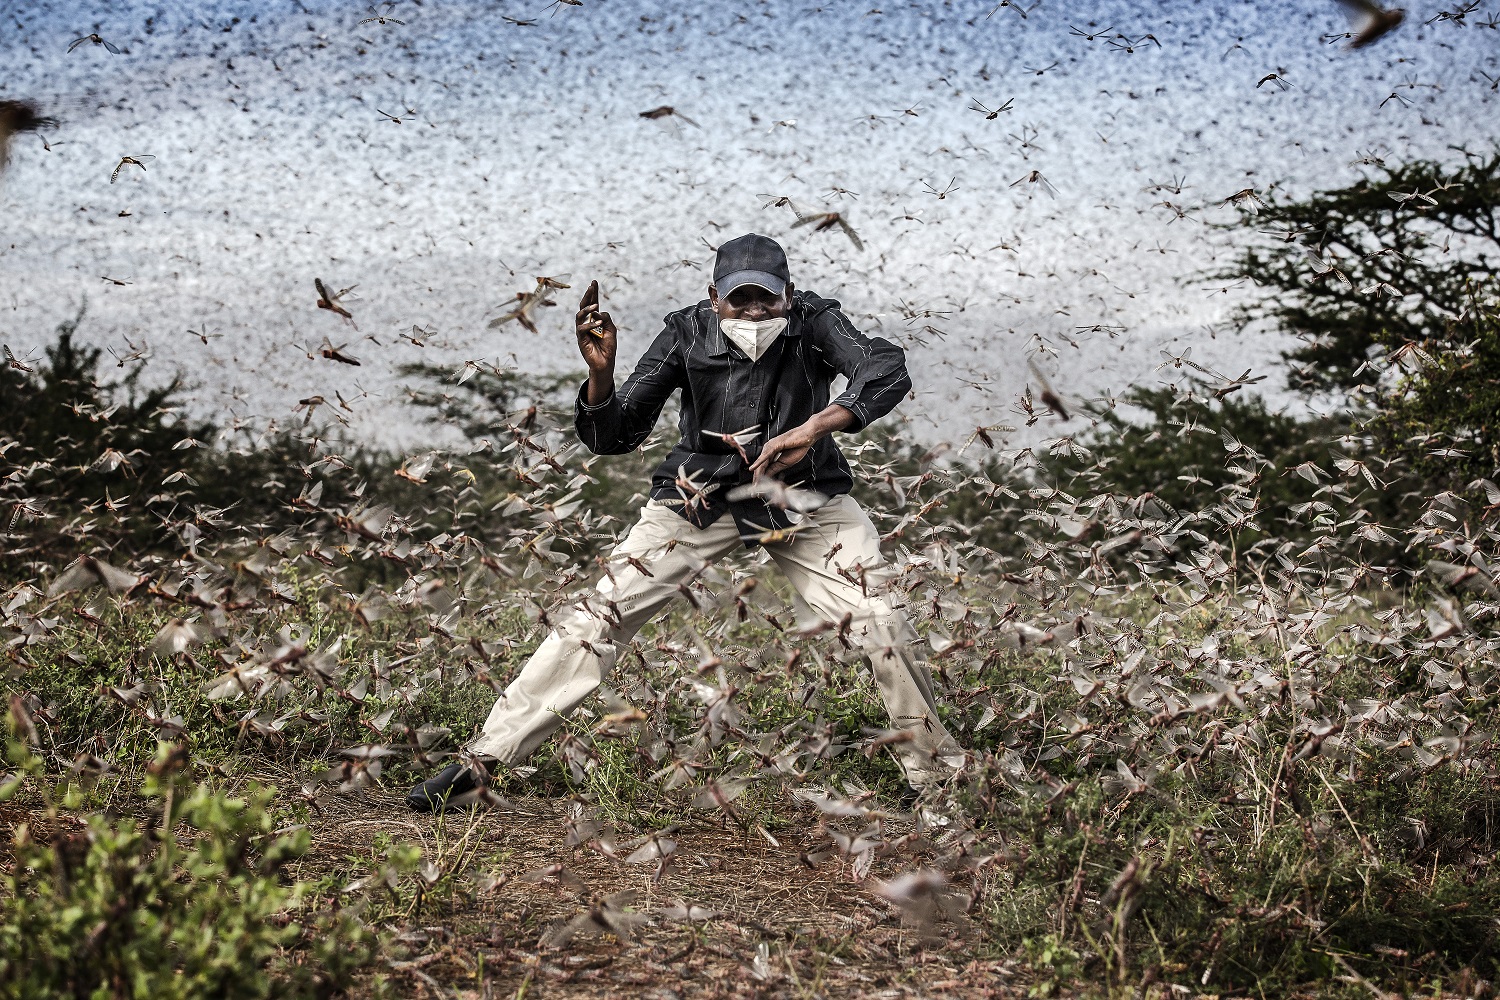 Man in a blue hat and shirt in a cloud of locust grasshoppers